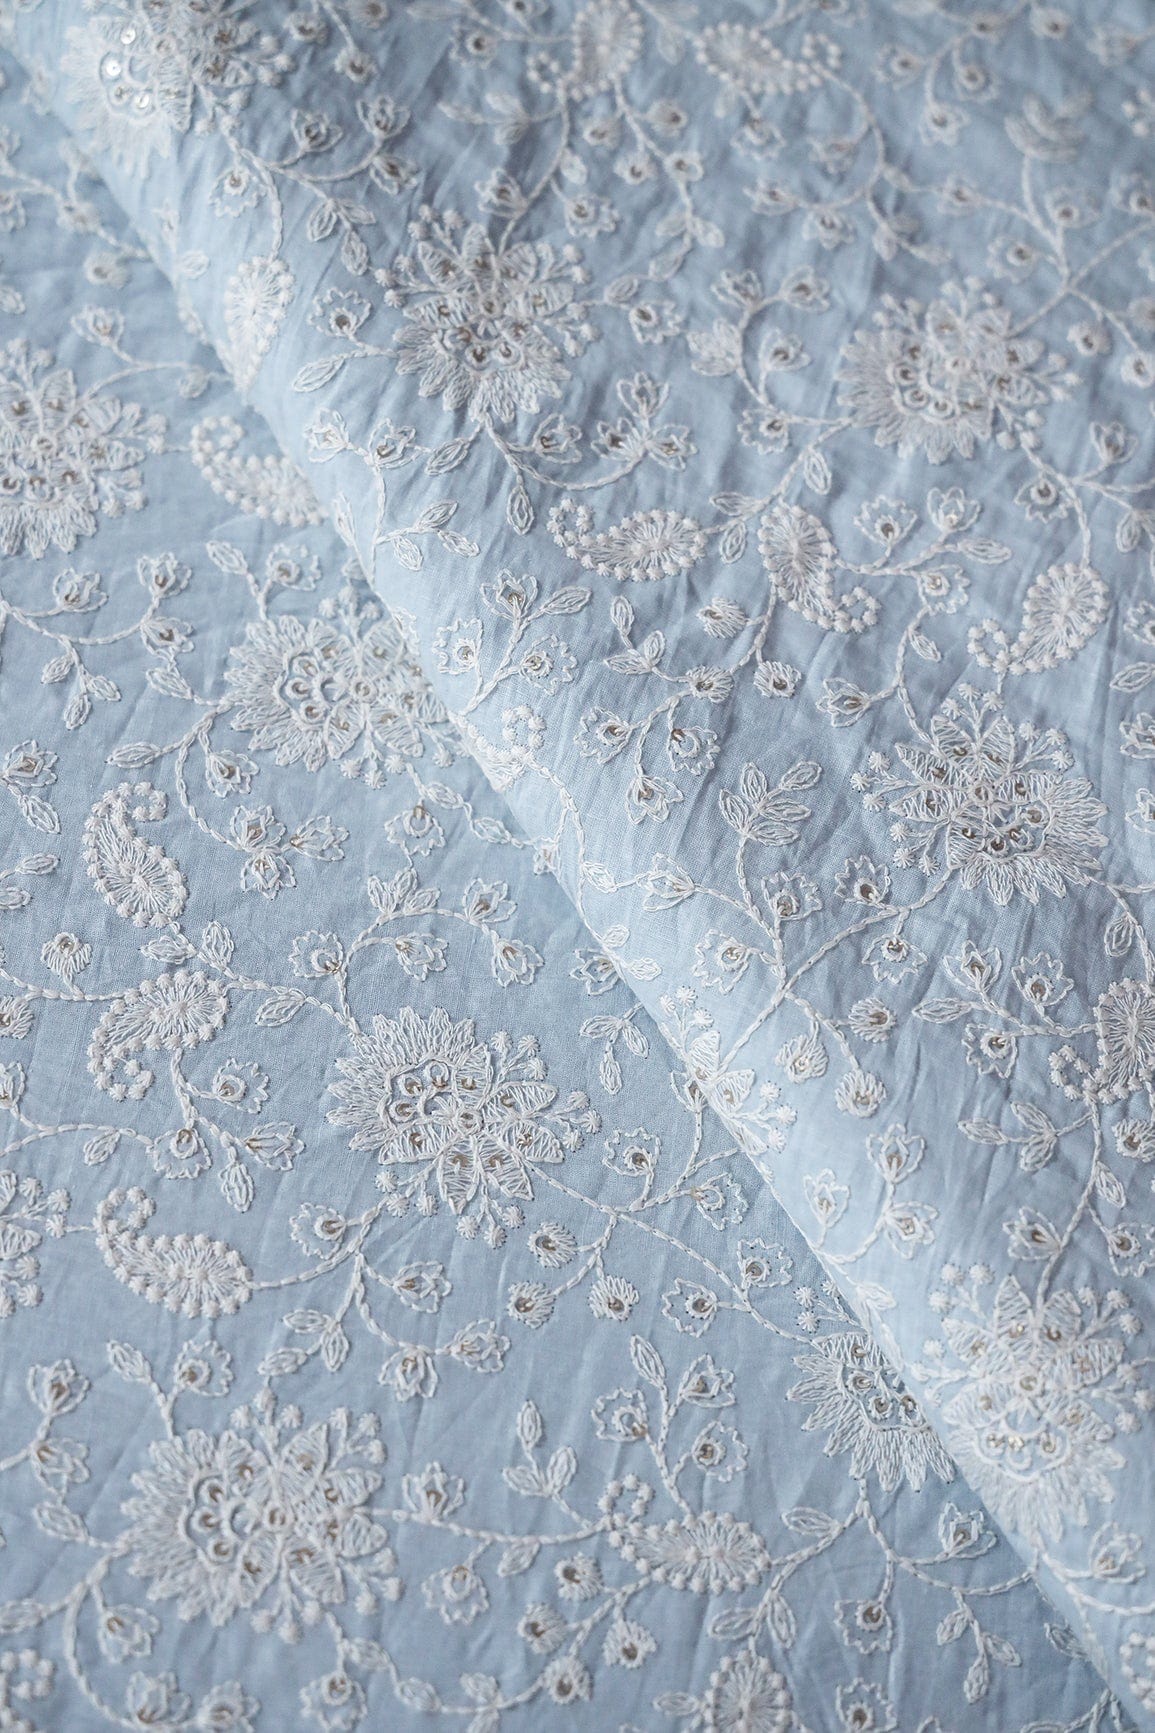 doeraa Embroidery Fabrics Beautiful White Thread With Gold Sequins Lucknowi Floral Embroidery Work On Pastel Blue Soft Cotton Fabric